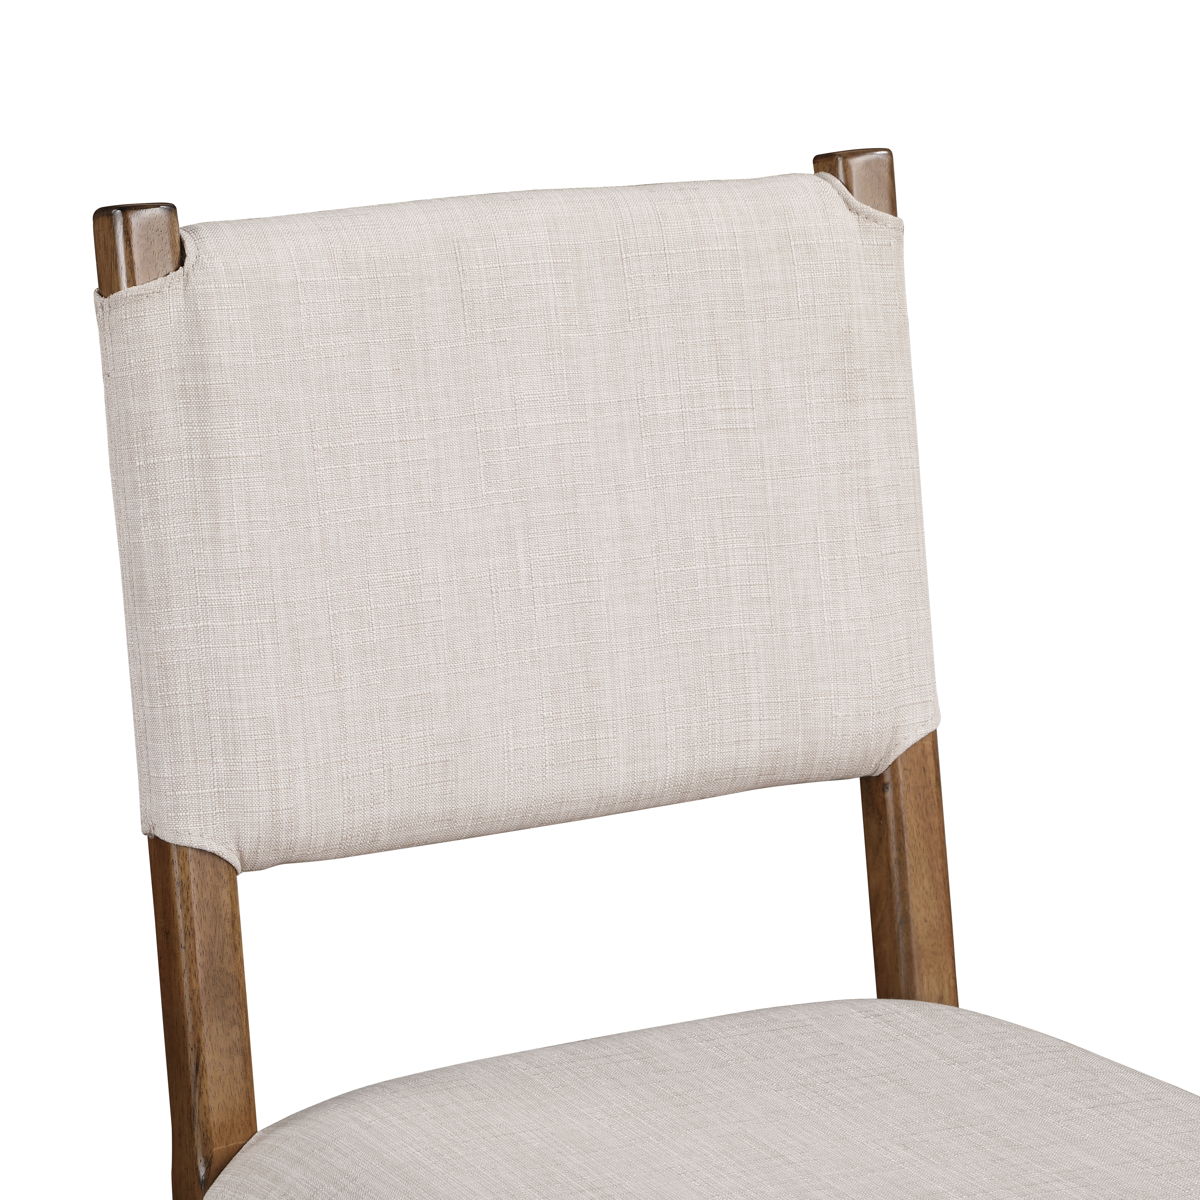 Oslo - Counter Chair (Set of 2)